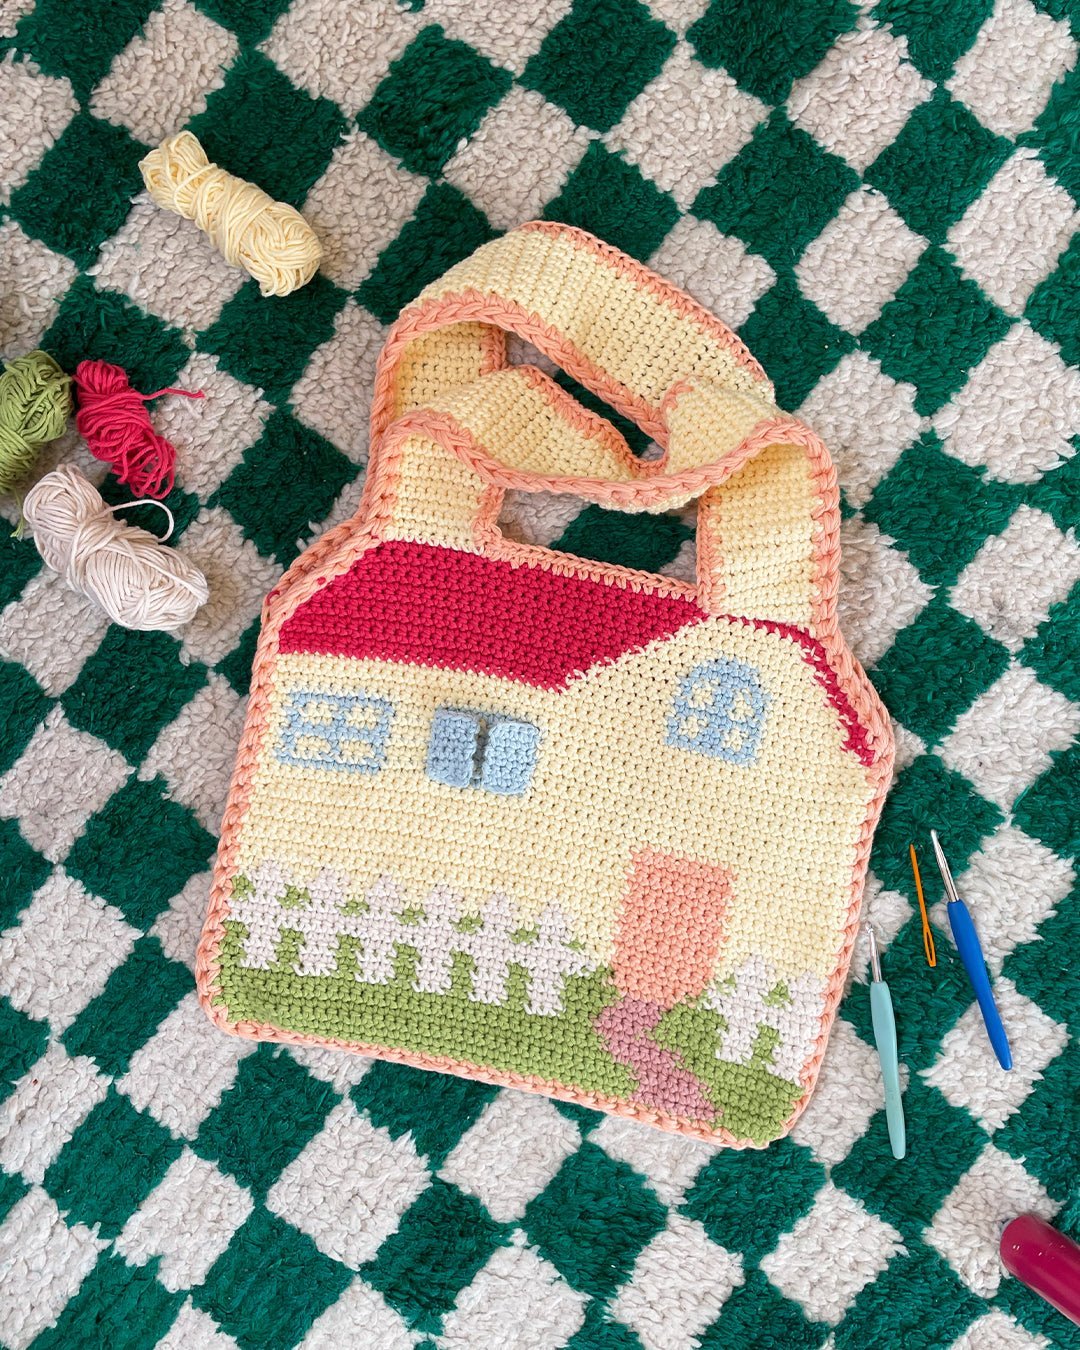 Crochet Bag Pattern - This House Is Not A Home bag